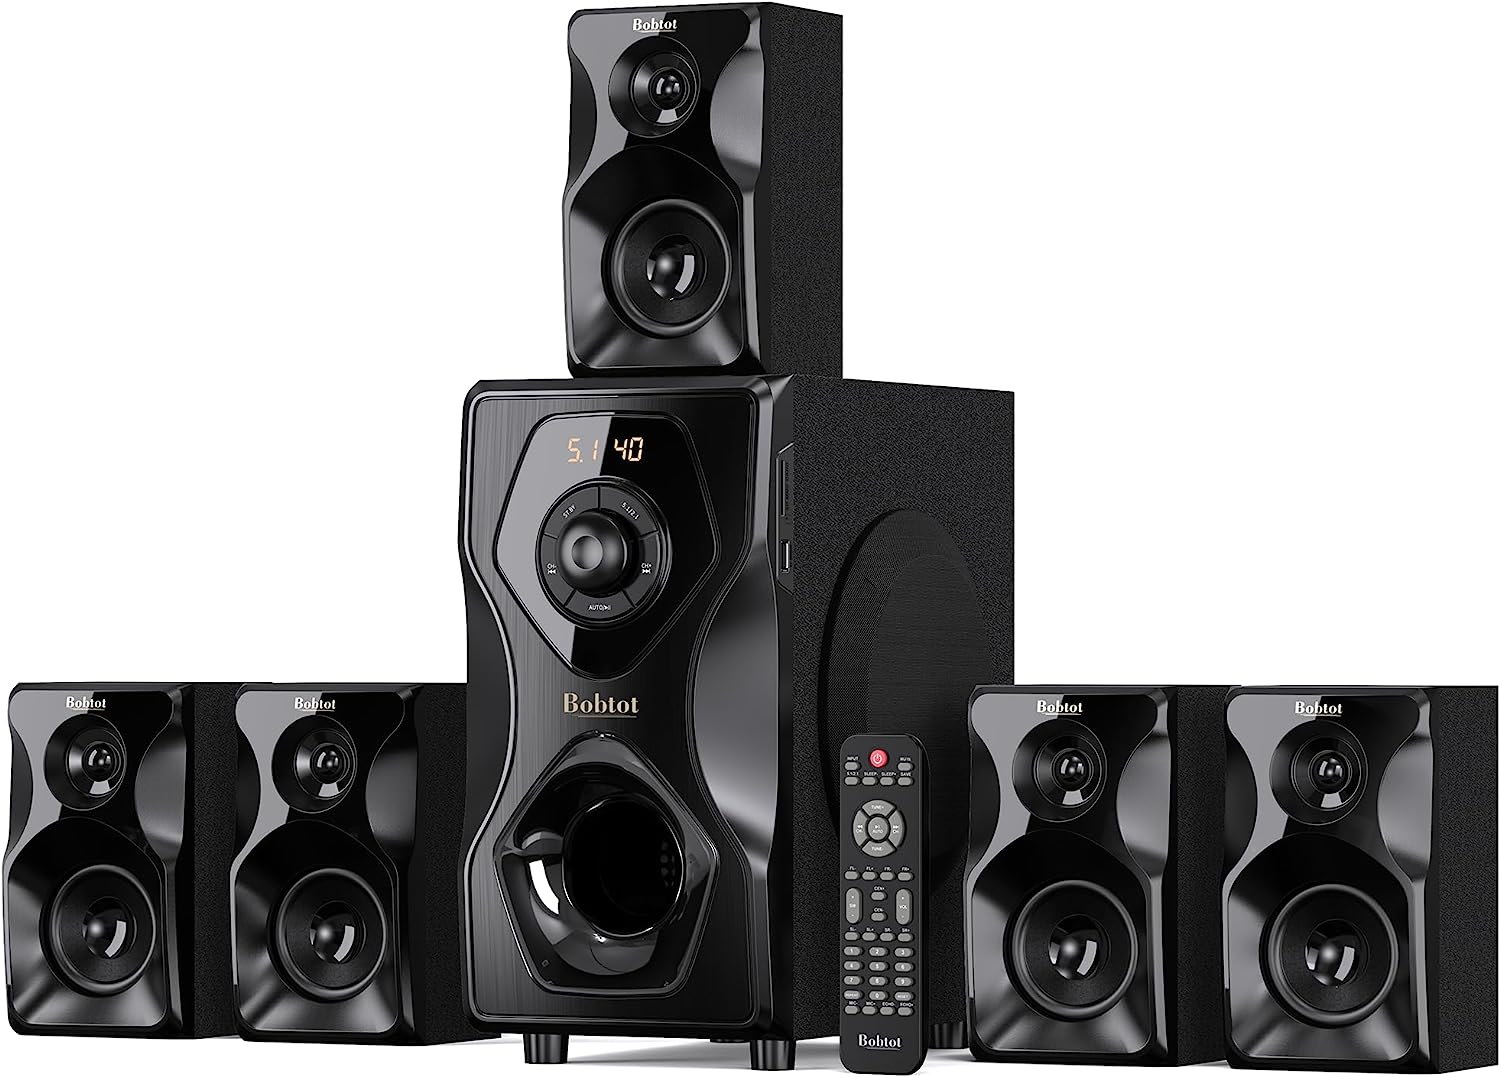 Bobtot Surround Sound Speakers Home Theater Systems Review